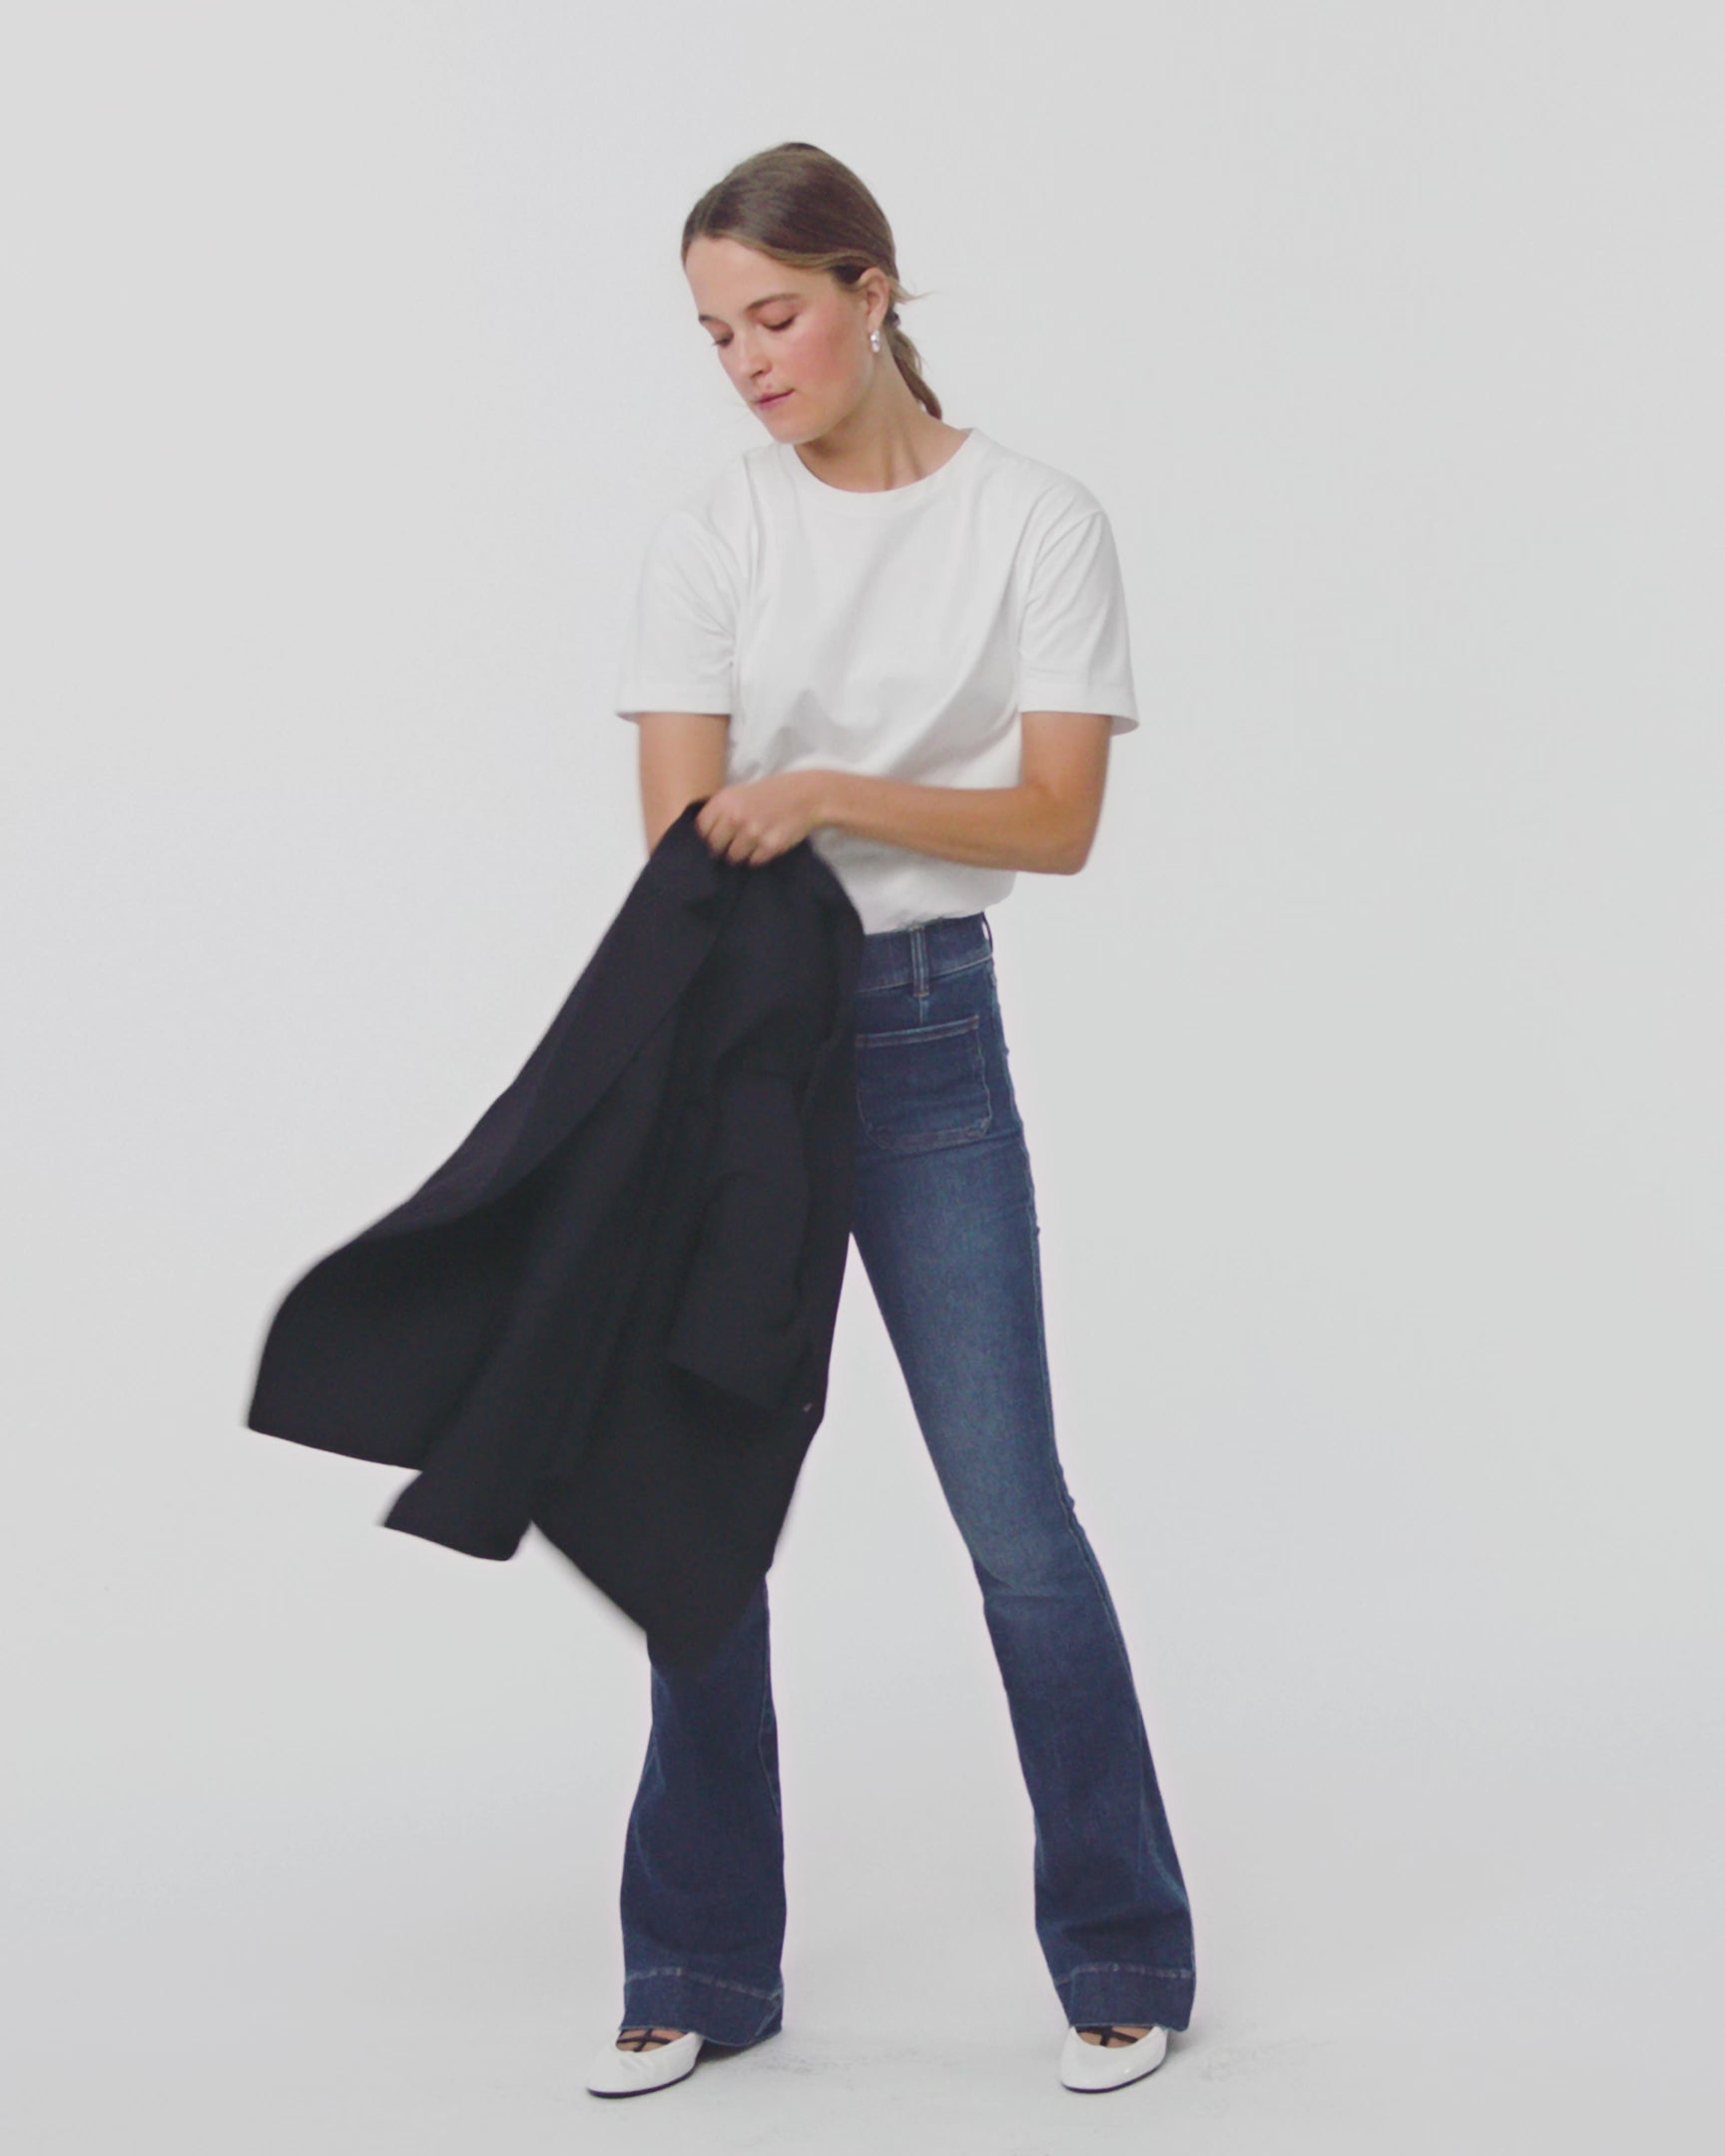 Petite Spanx Flare Jeans in Midnight Shade – Karats & Keepsakes Boutique